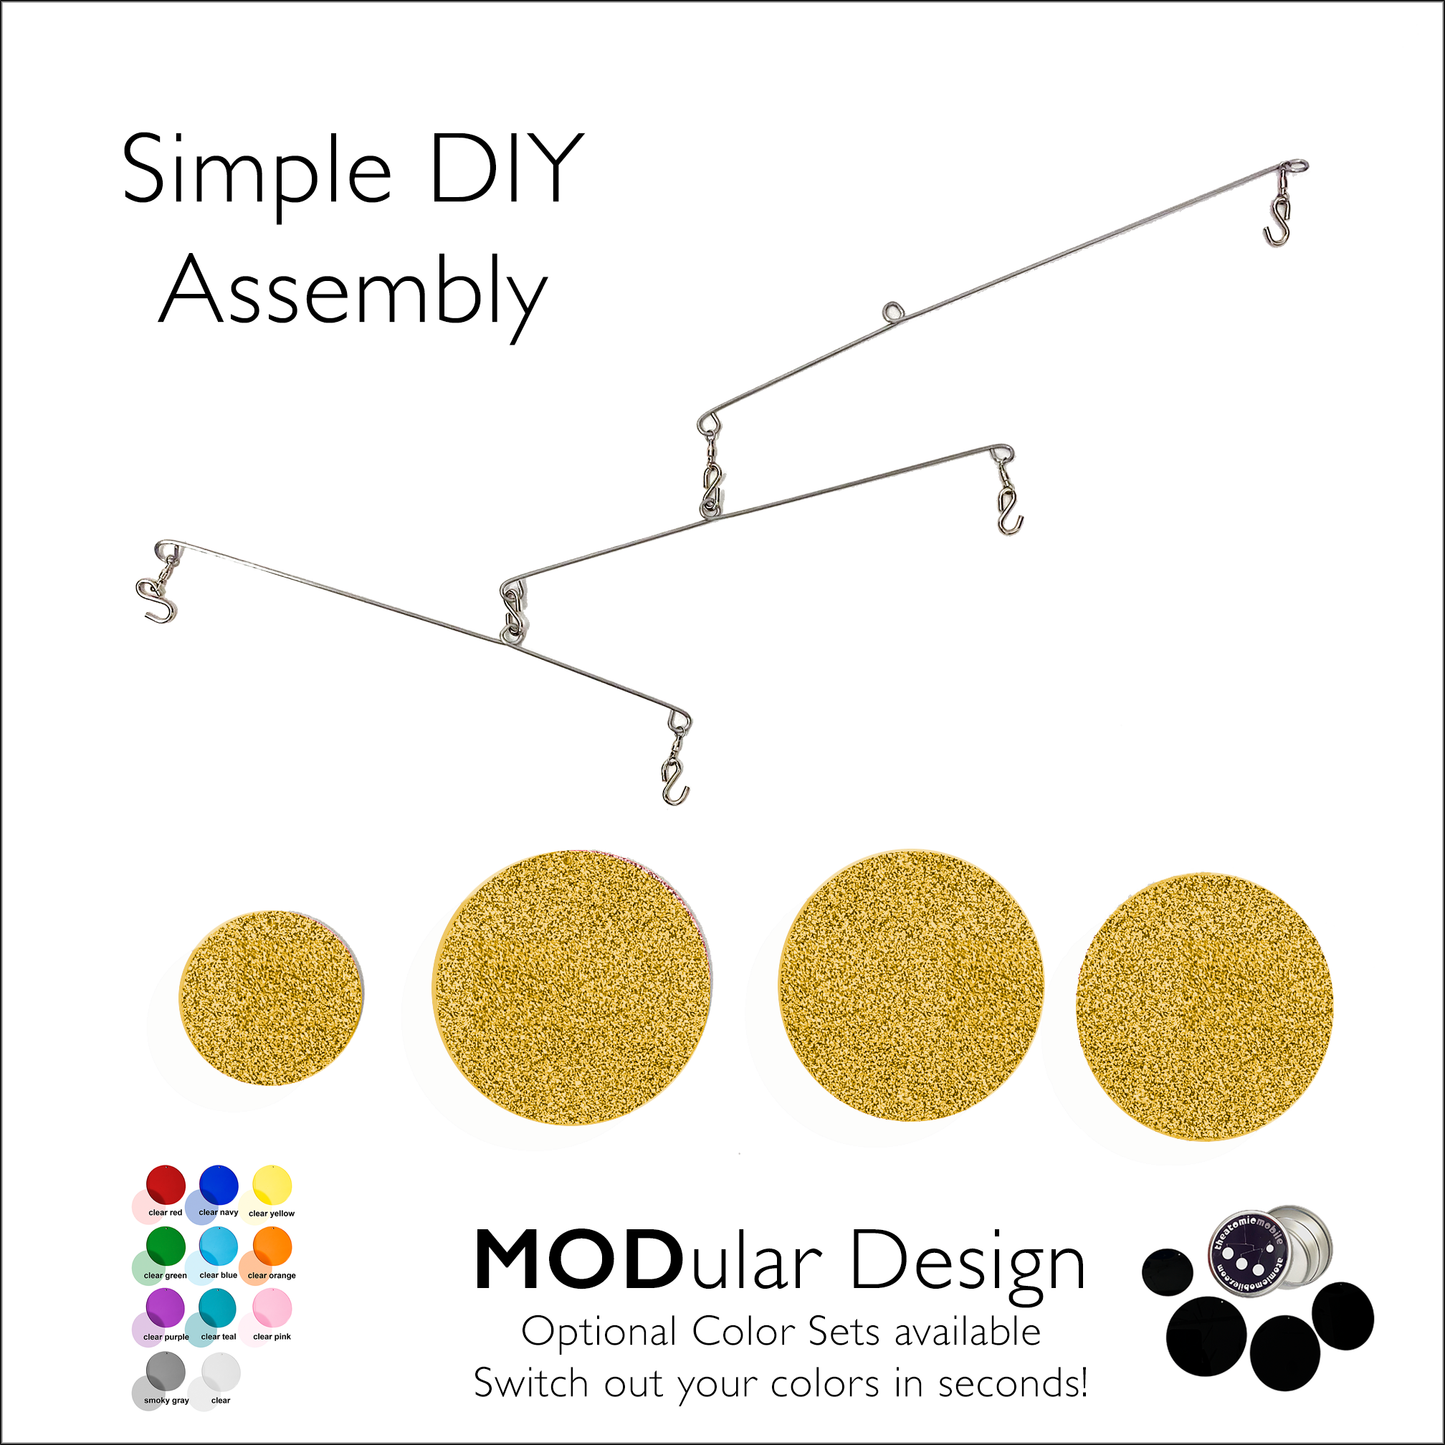 Gold Glitter Atomic Mobile unassembled - kinetic hanging art mobiles by AtomicMobiles.com